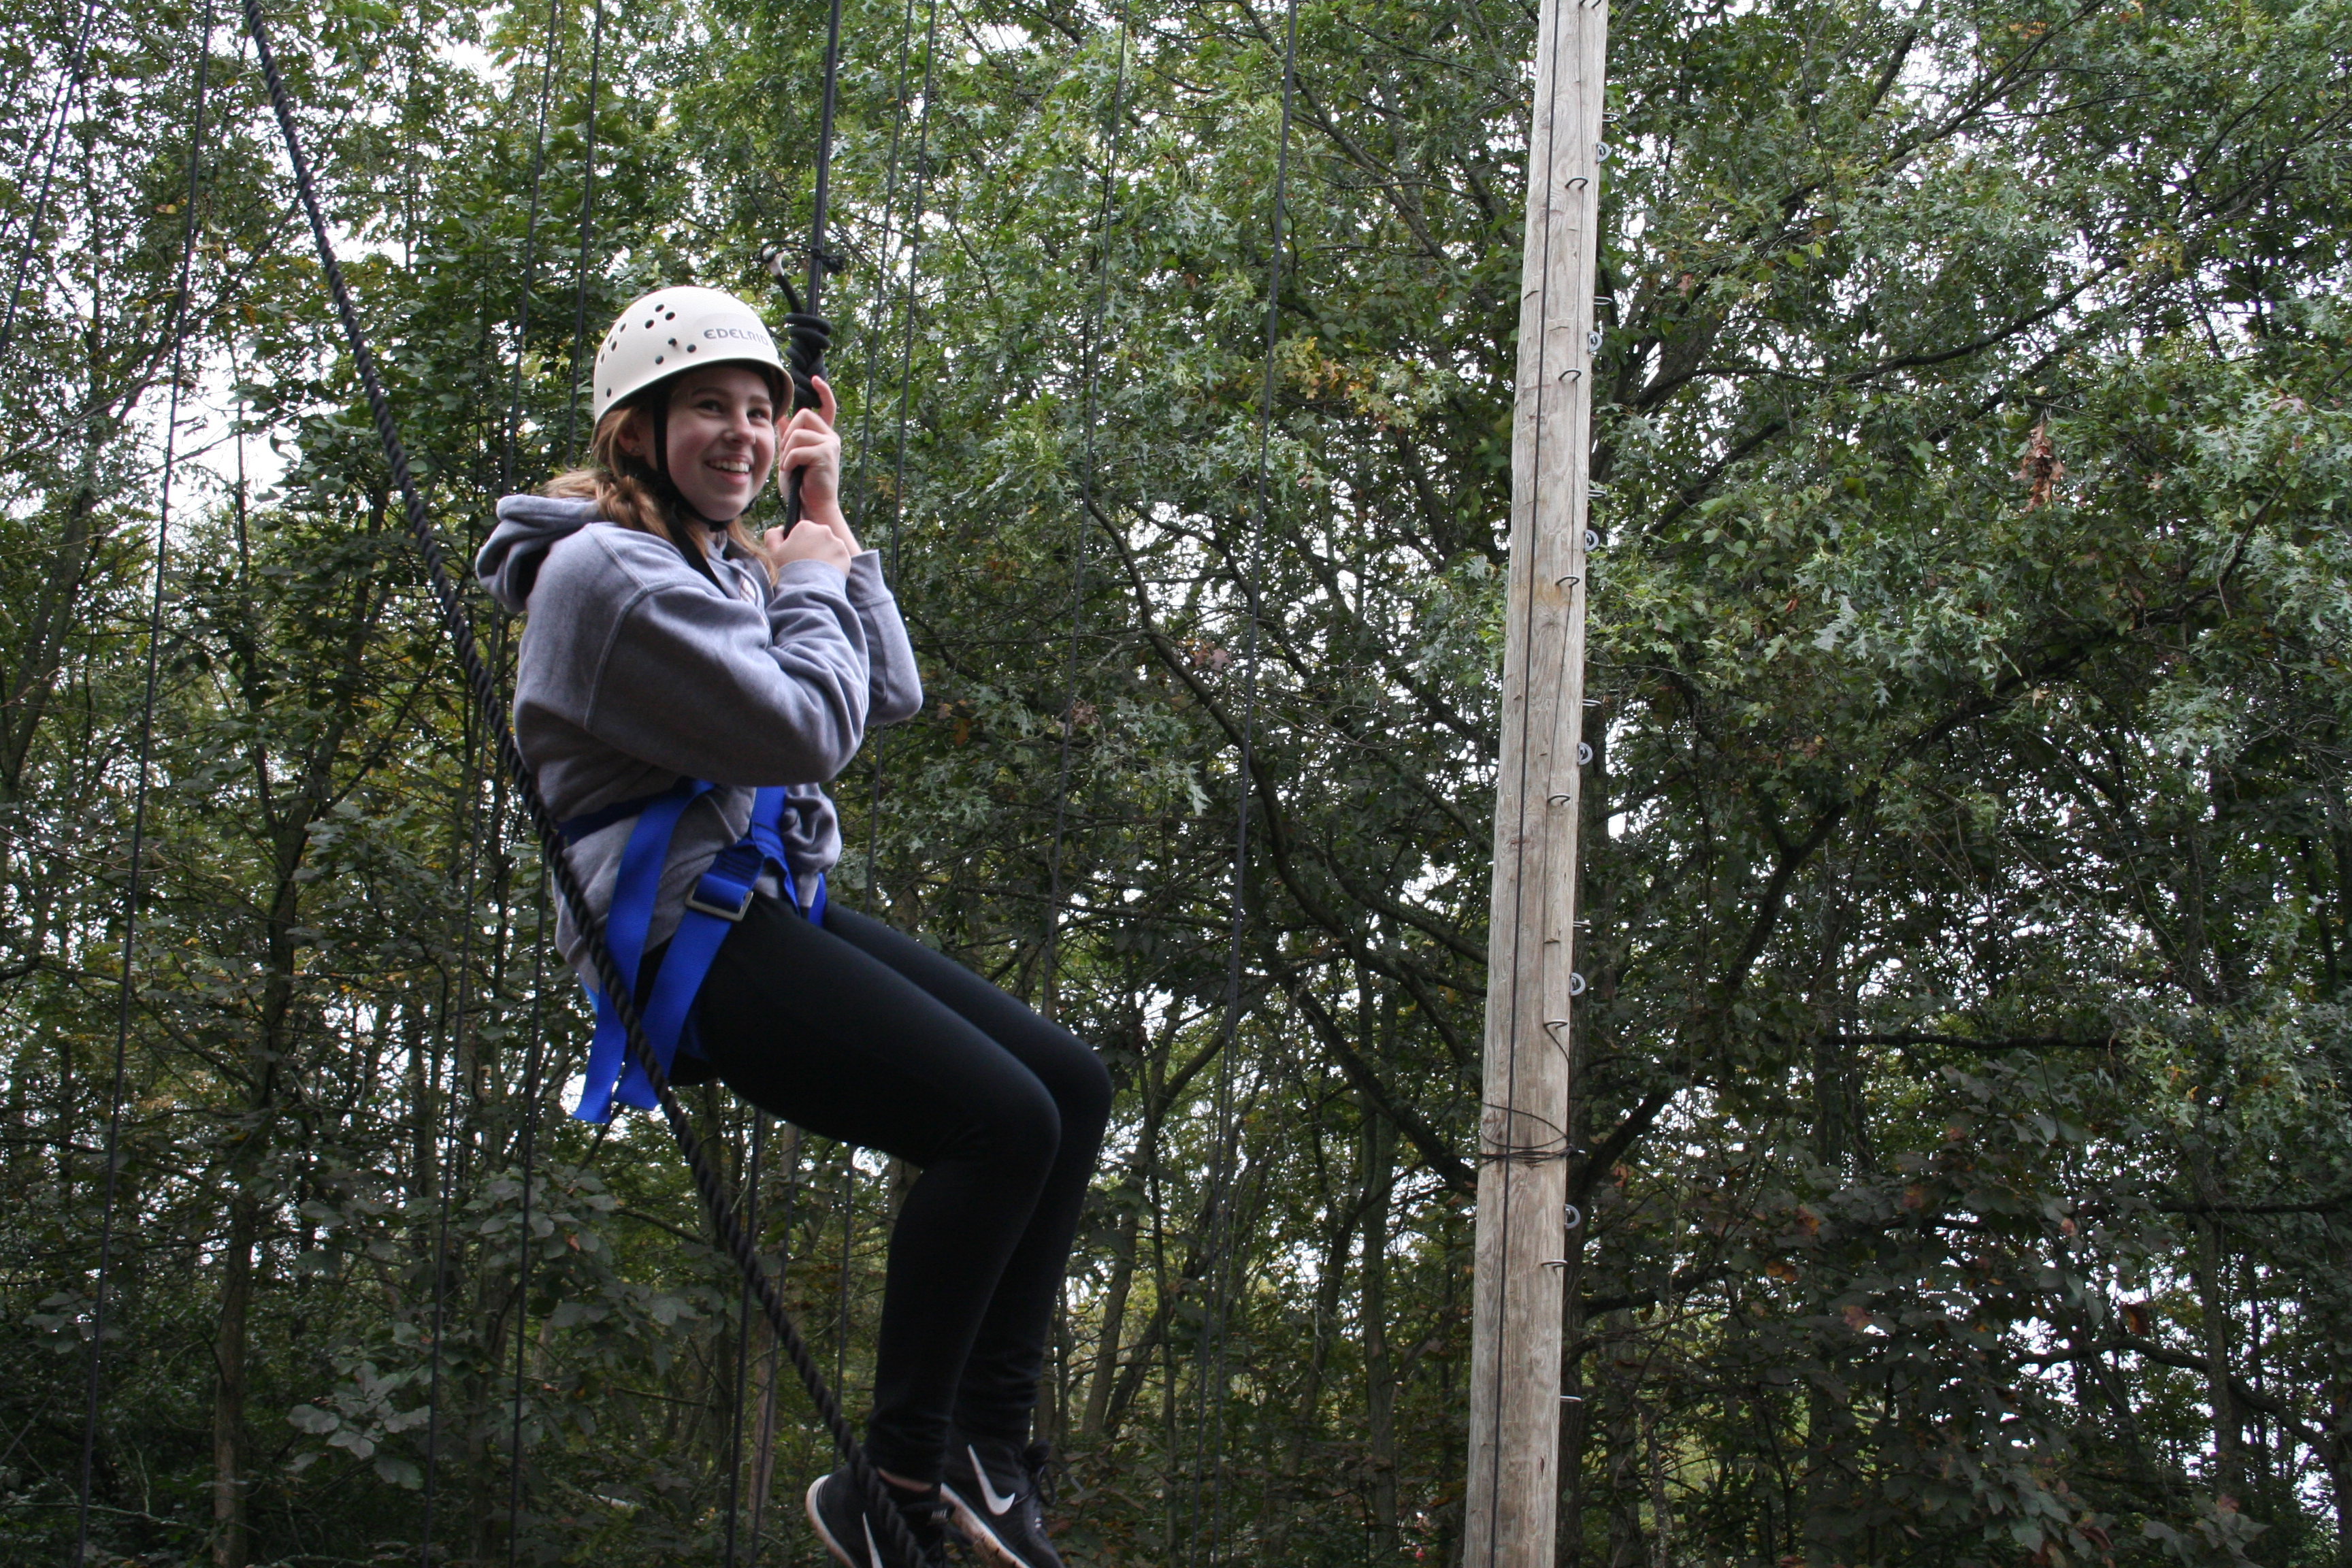 Alyson Reese Hangs Out On High Ropes Course